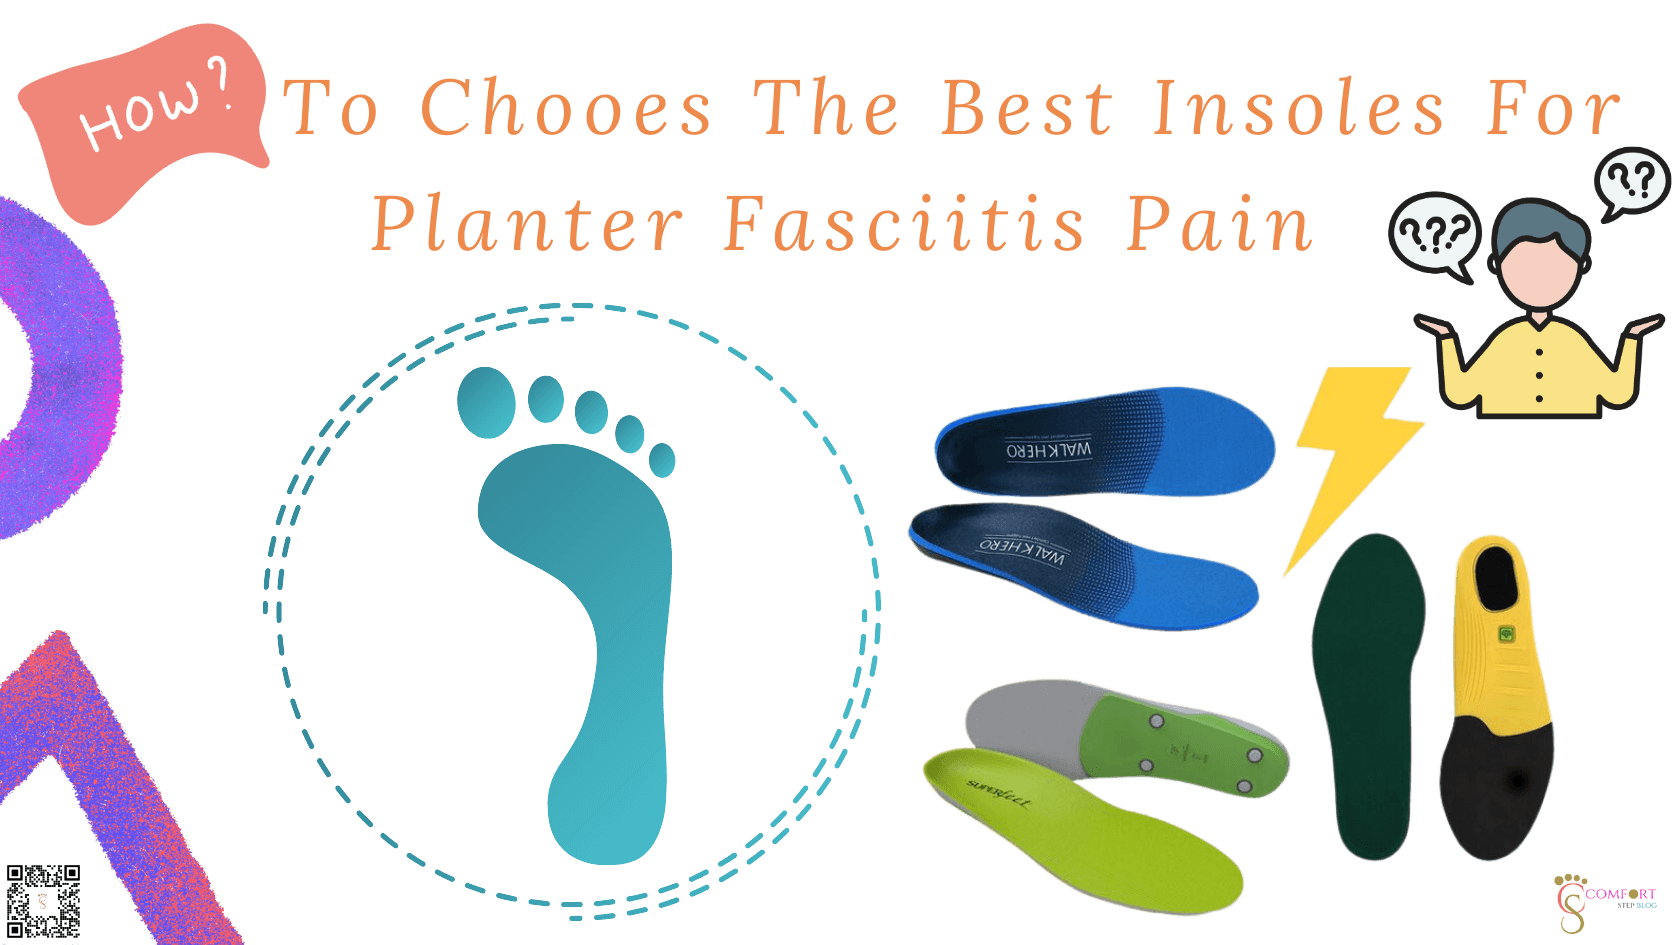 How To Chooes The Best Insoles For Planter Fasciitis Pain?